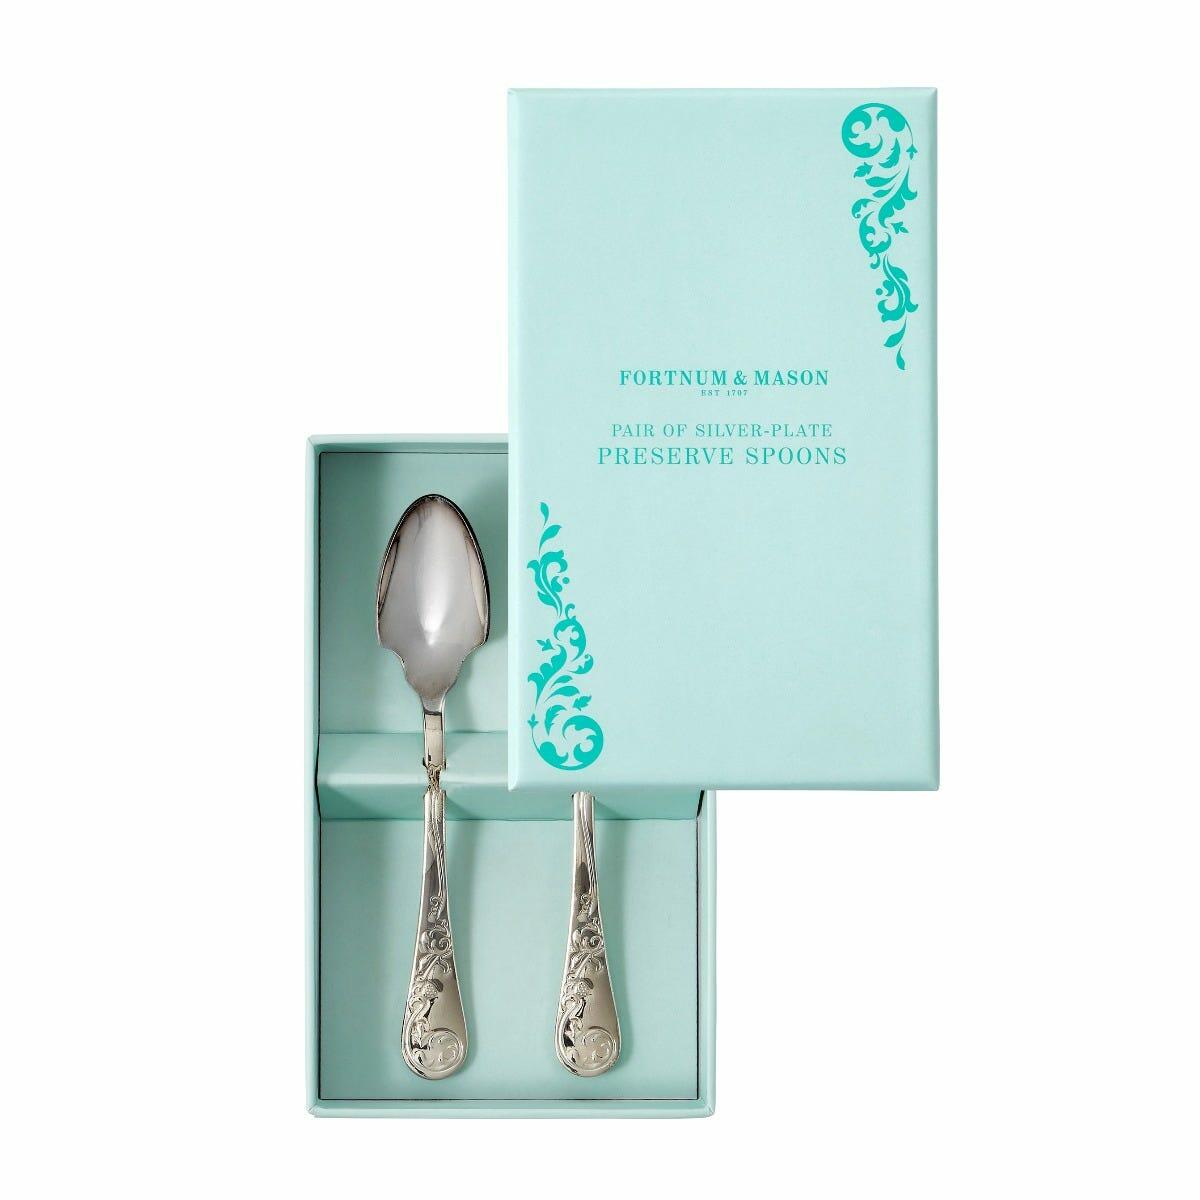 Fortnum & Mason Silver-Plated Preserve Spoons, Set Of 2